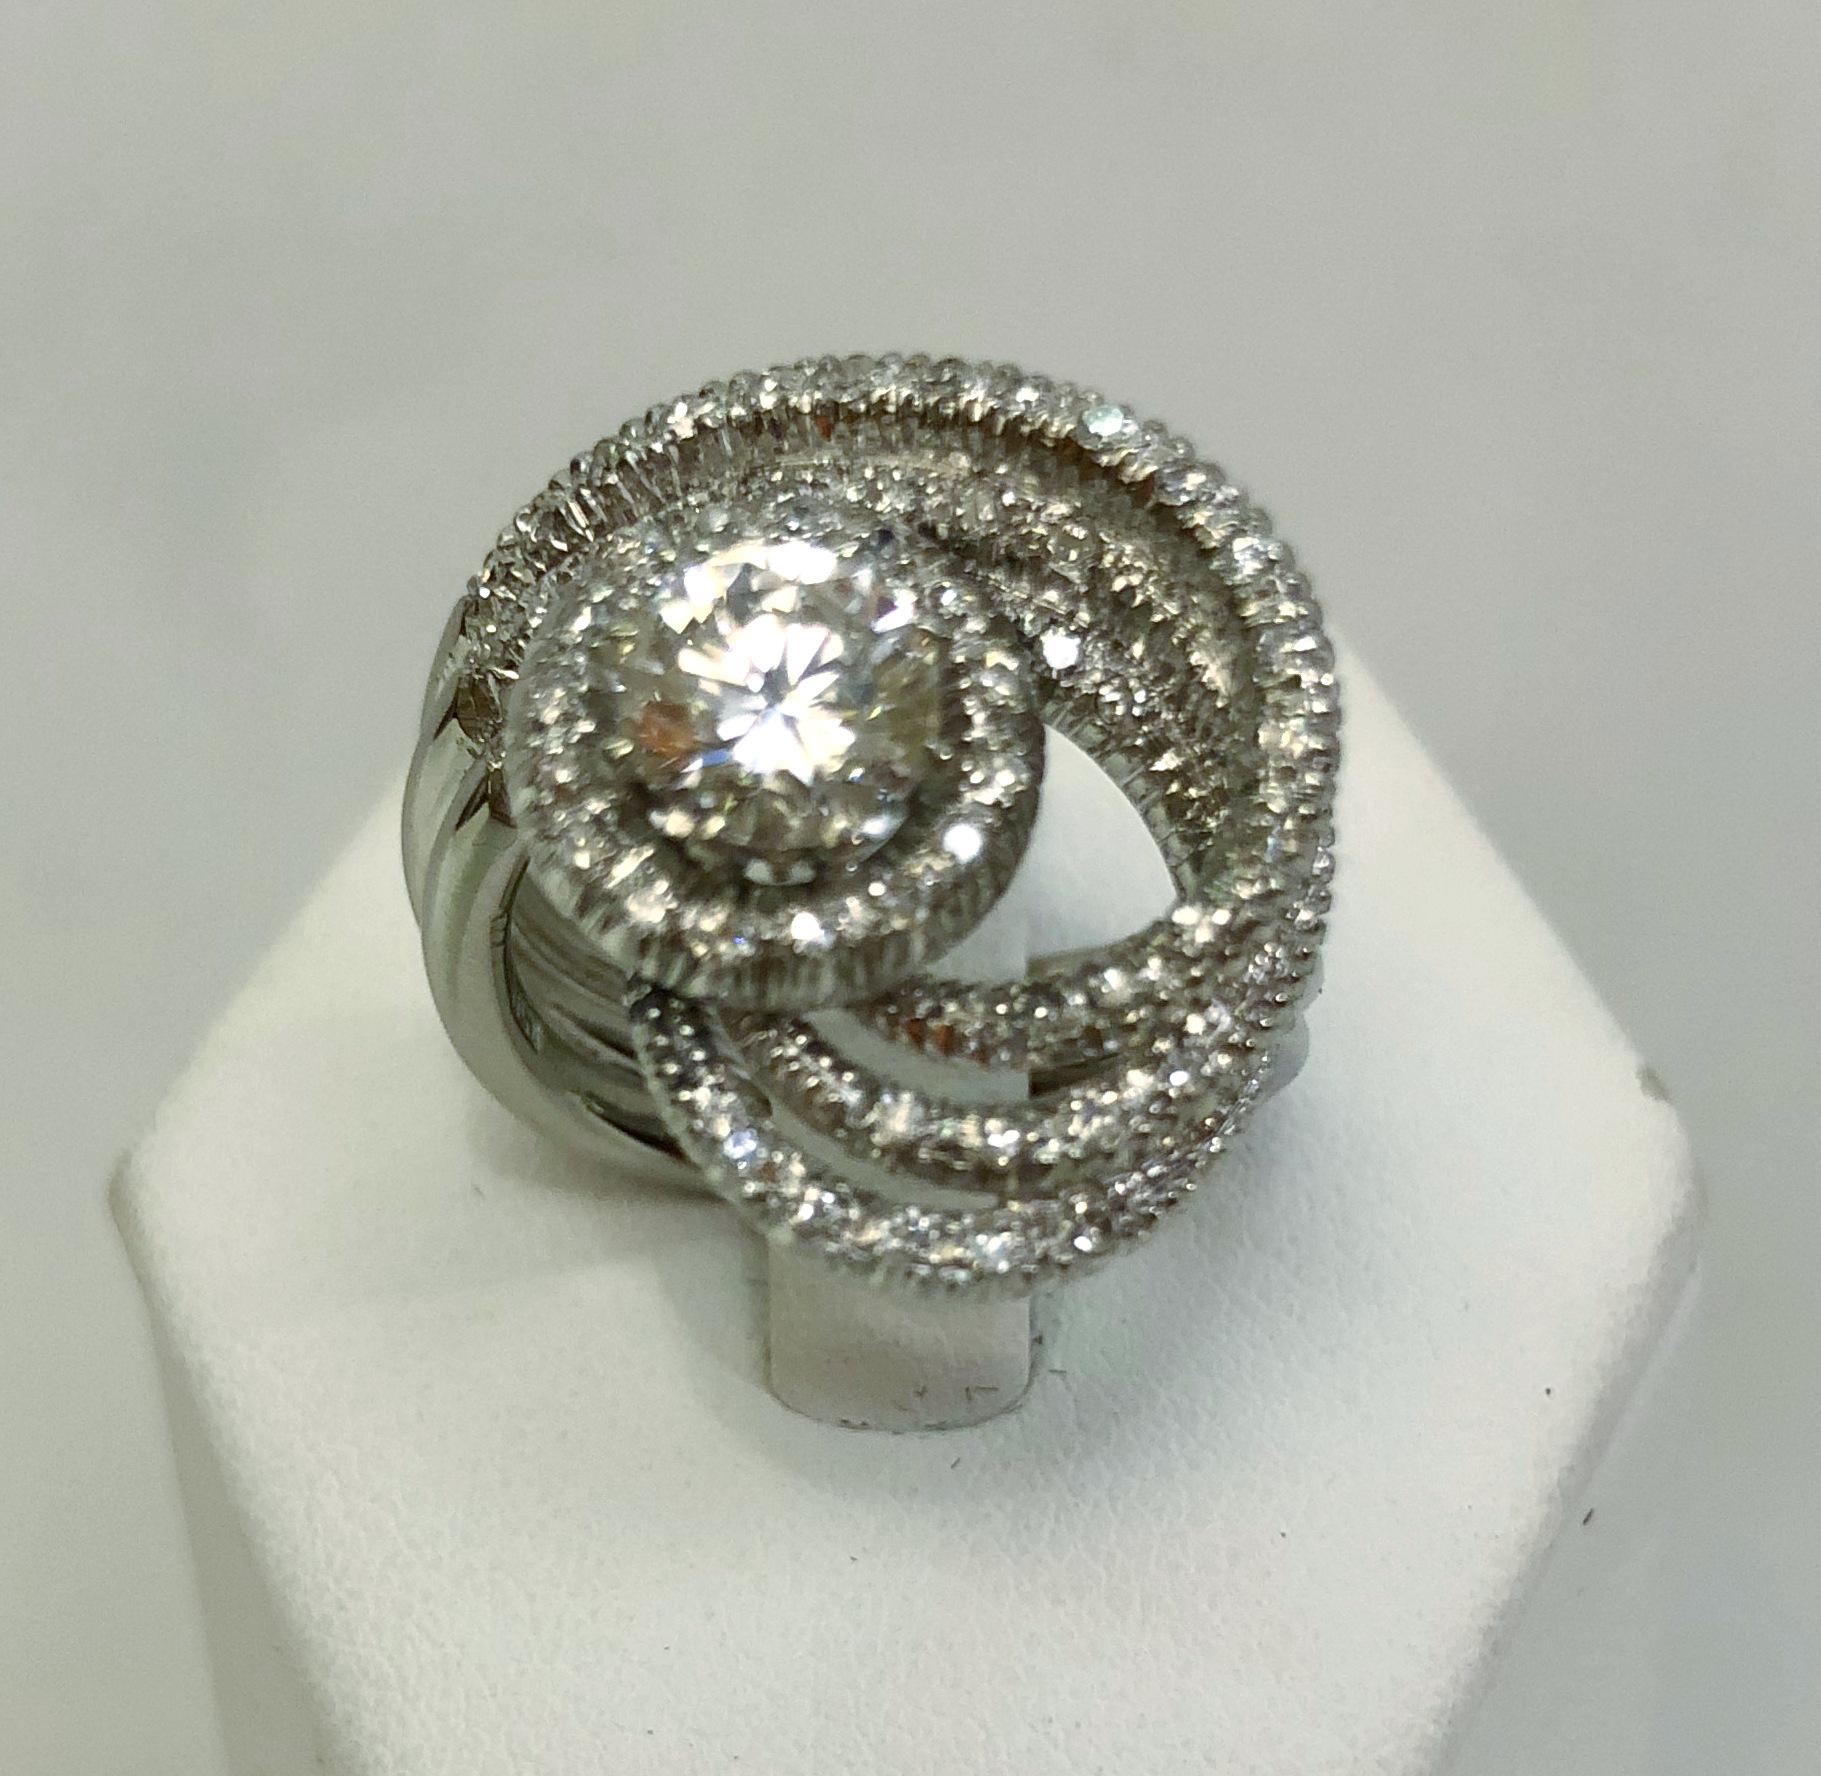 18 karat white gold ring with a central brilliant diamond of 0.90 carats and smaller diamonds of 0.6 carats on the spiral outline / Made in Italy 1950s
Ring size US 6.75